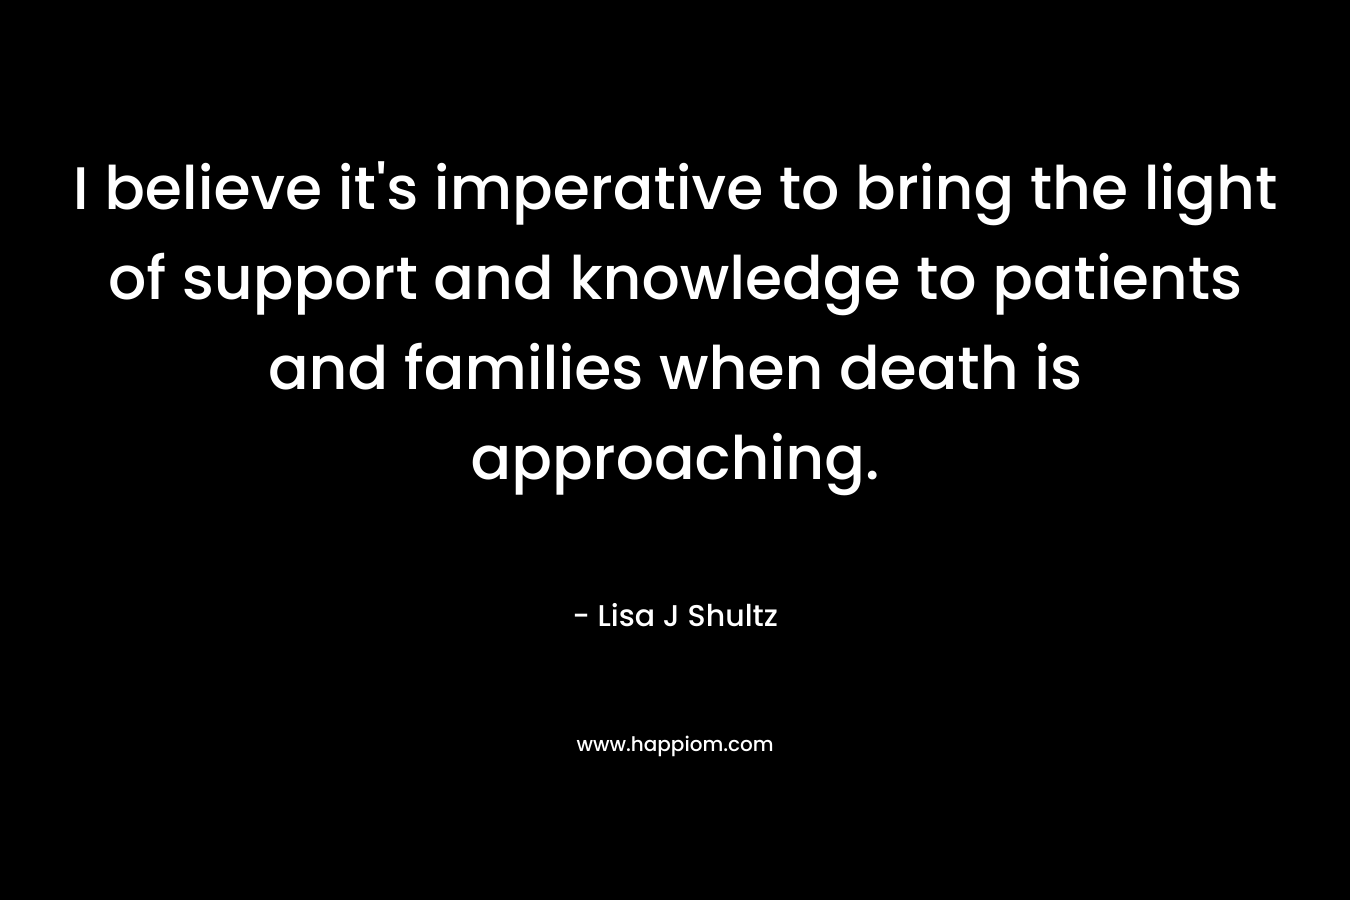 I believe it's imperative to bring the light of support and knowledge to patients and families when death is approaching.